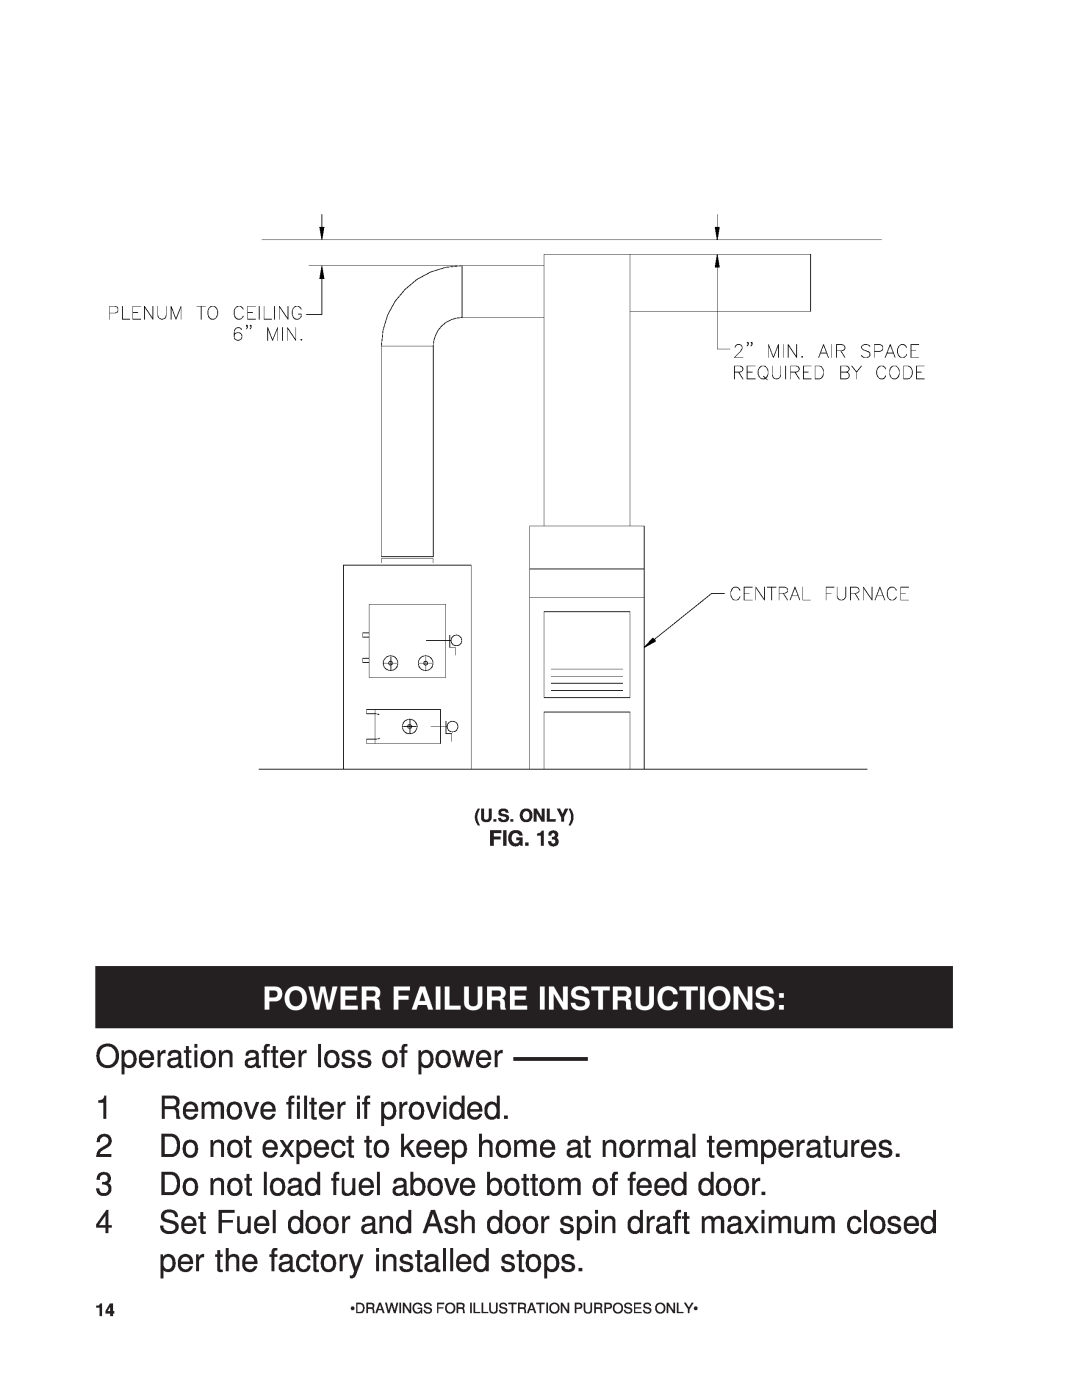 United States Stove 1200Q Power Failure Instructions, Operation after loss of power, 1Remove filter if provided, Fig 